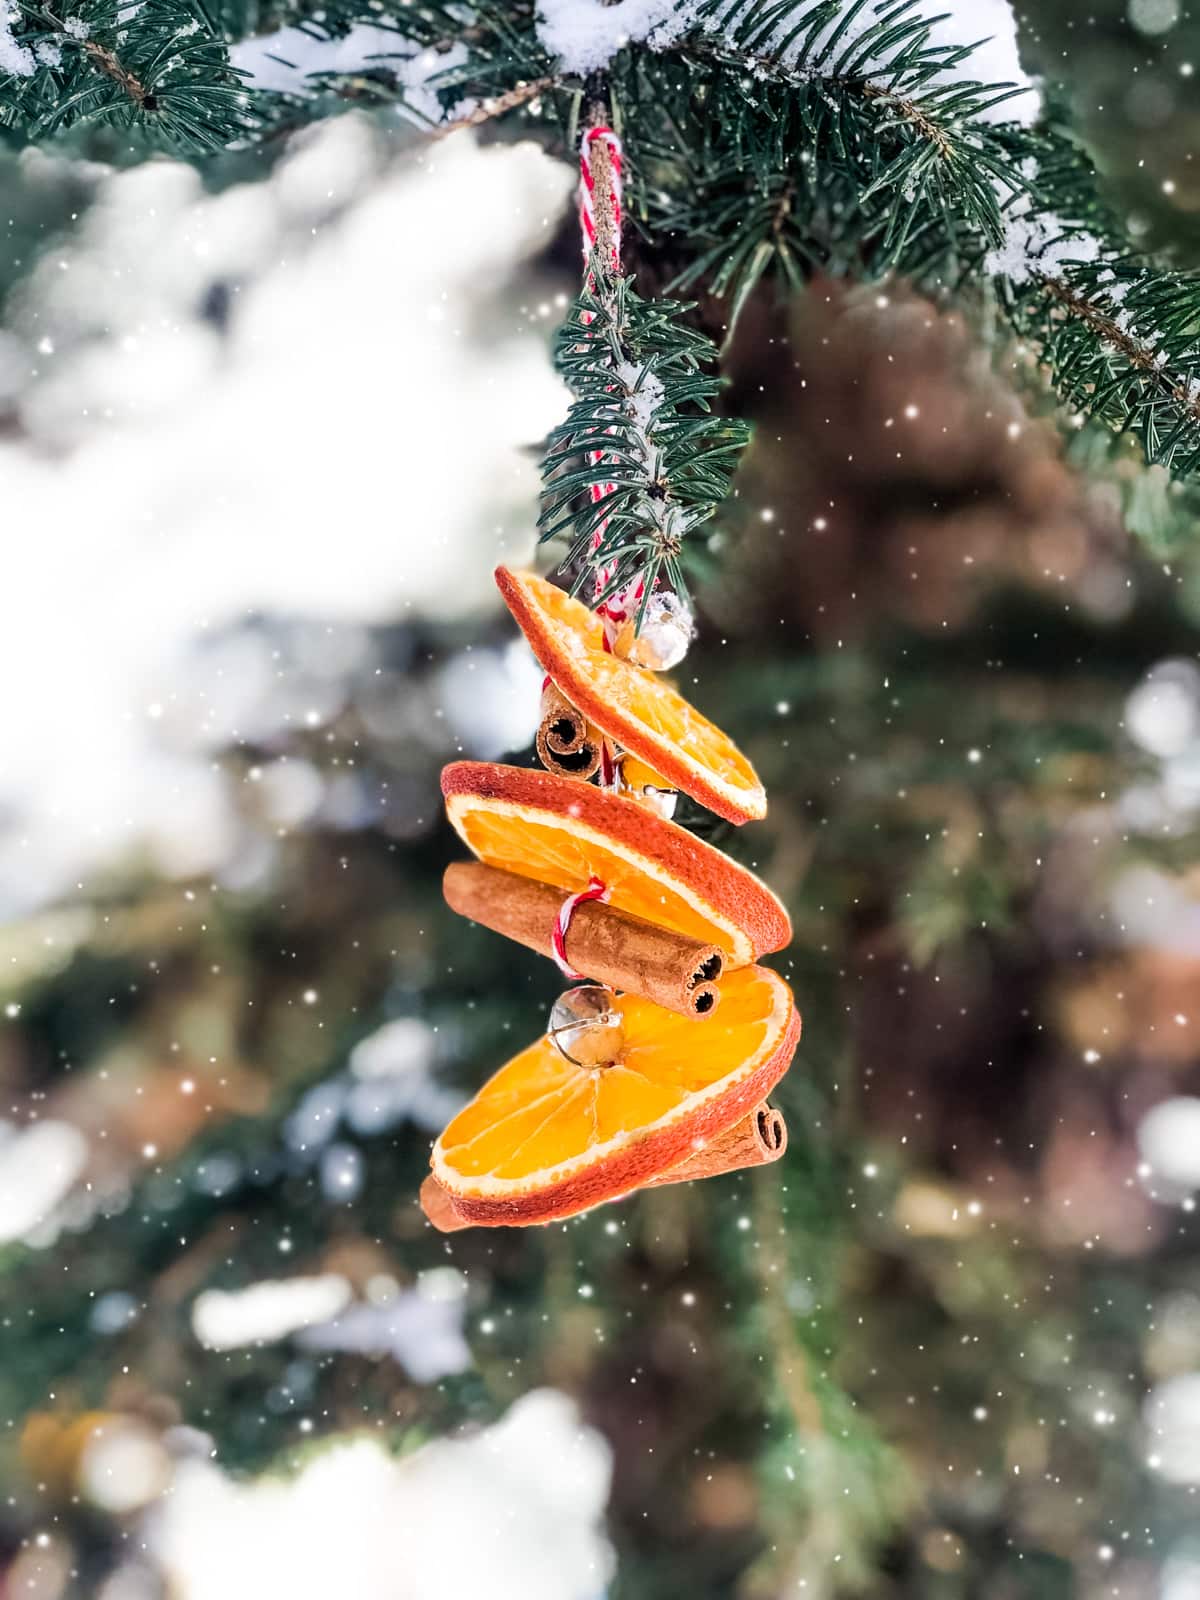 Christmas tree ornament made of orange slices (from A Pretty Life In The Suburbs)